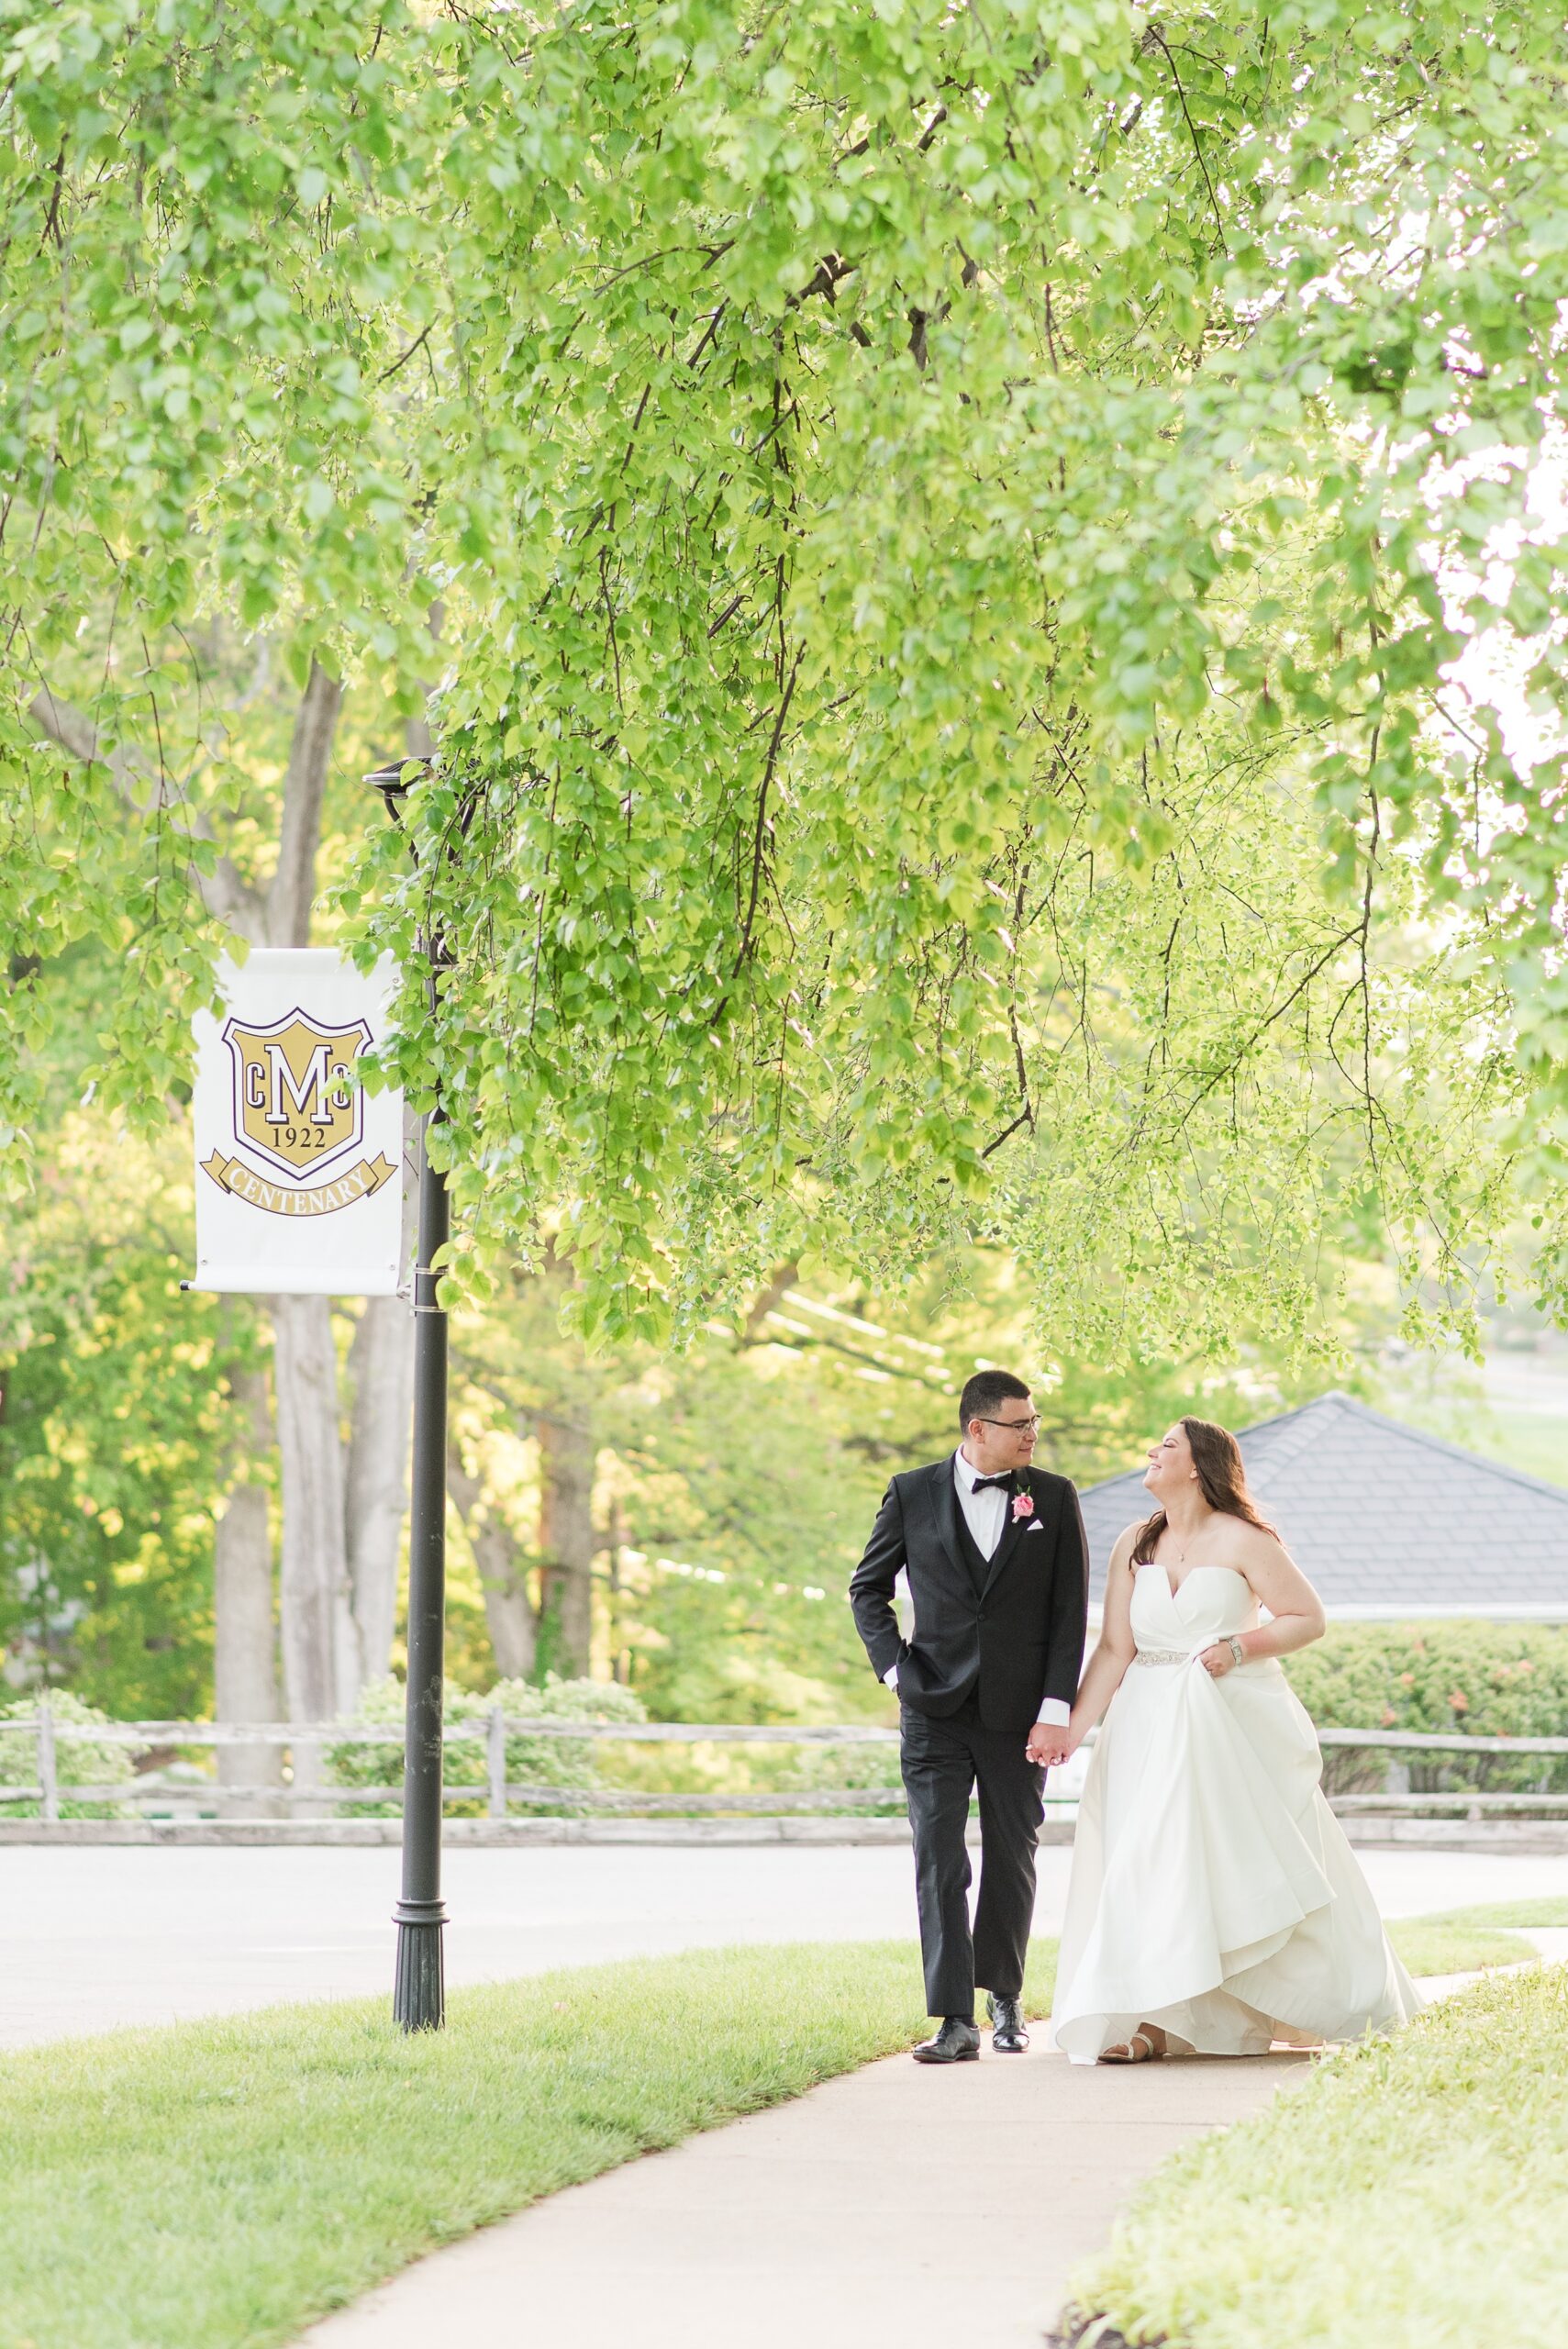 Newlyweds chat and laugh while walking under trees and holding hands at the Manor Country Club Wedding venue